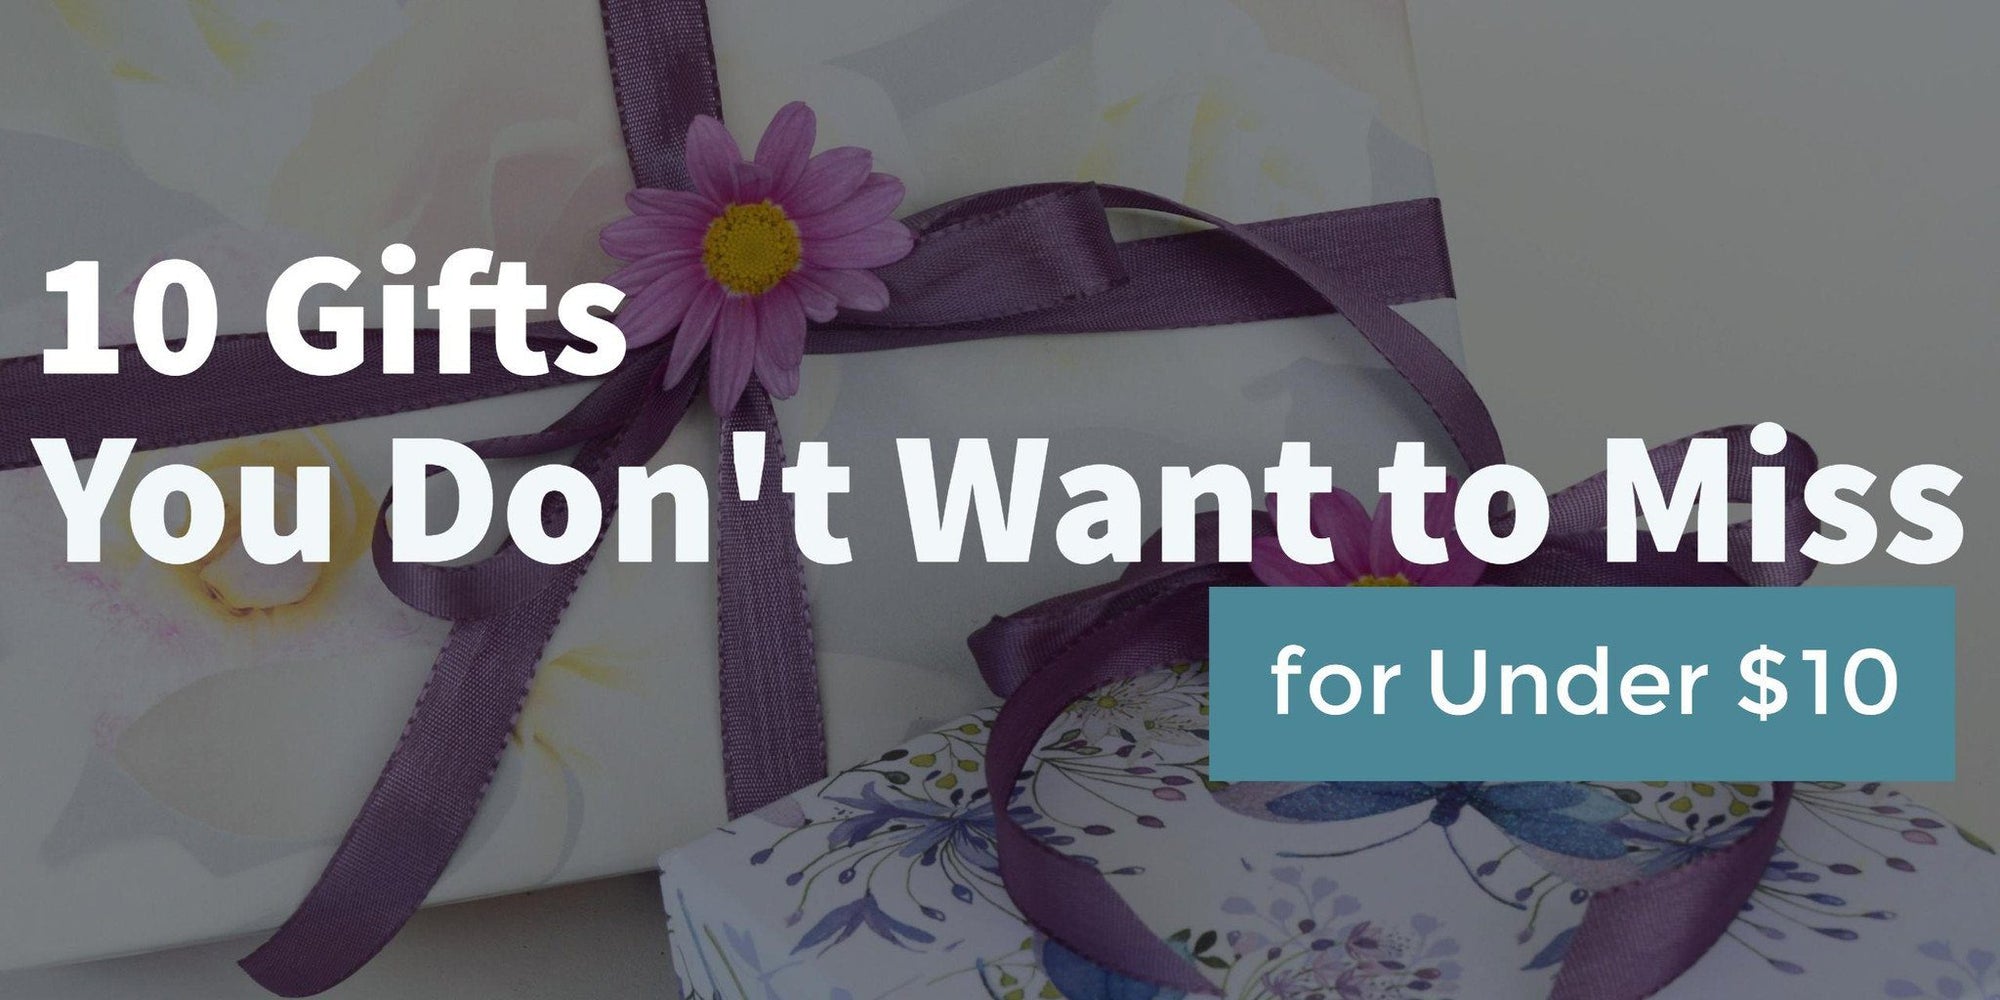 Find an Awesome Gift for Under $10!